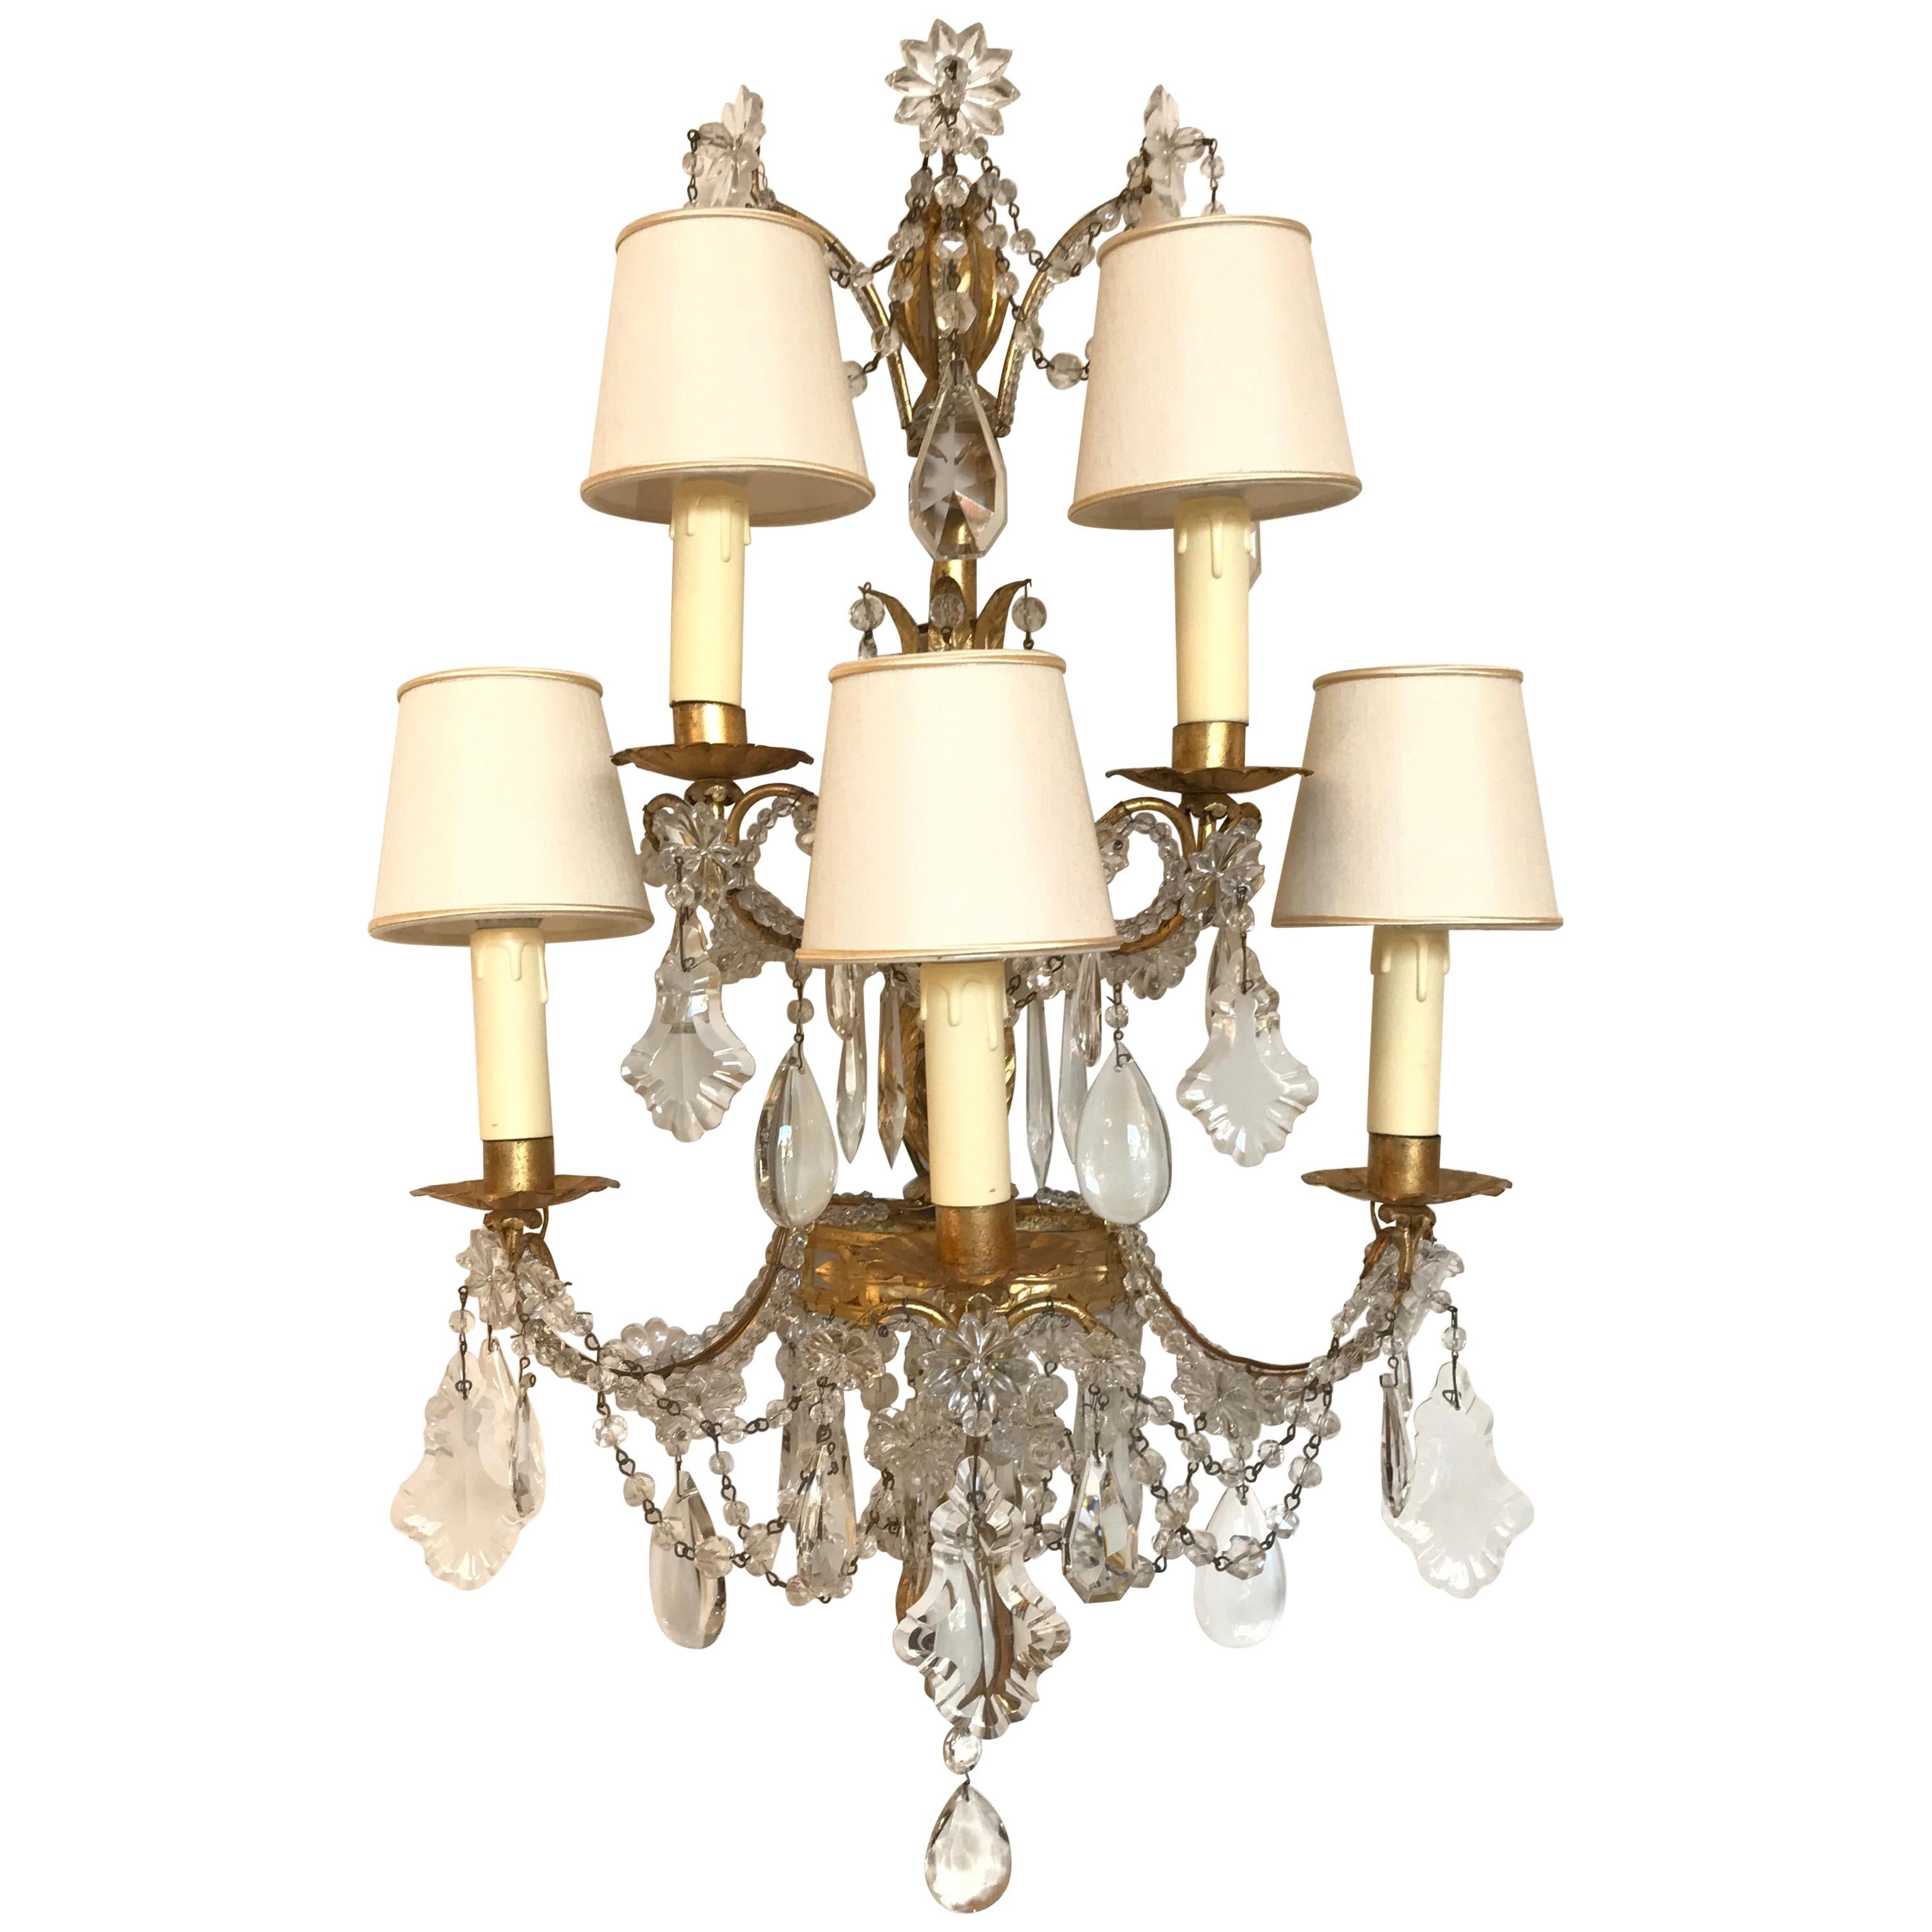 Pair of Handcut Crystal and Gilded Metal Five-Light Wall Scones Lights For Sale